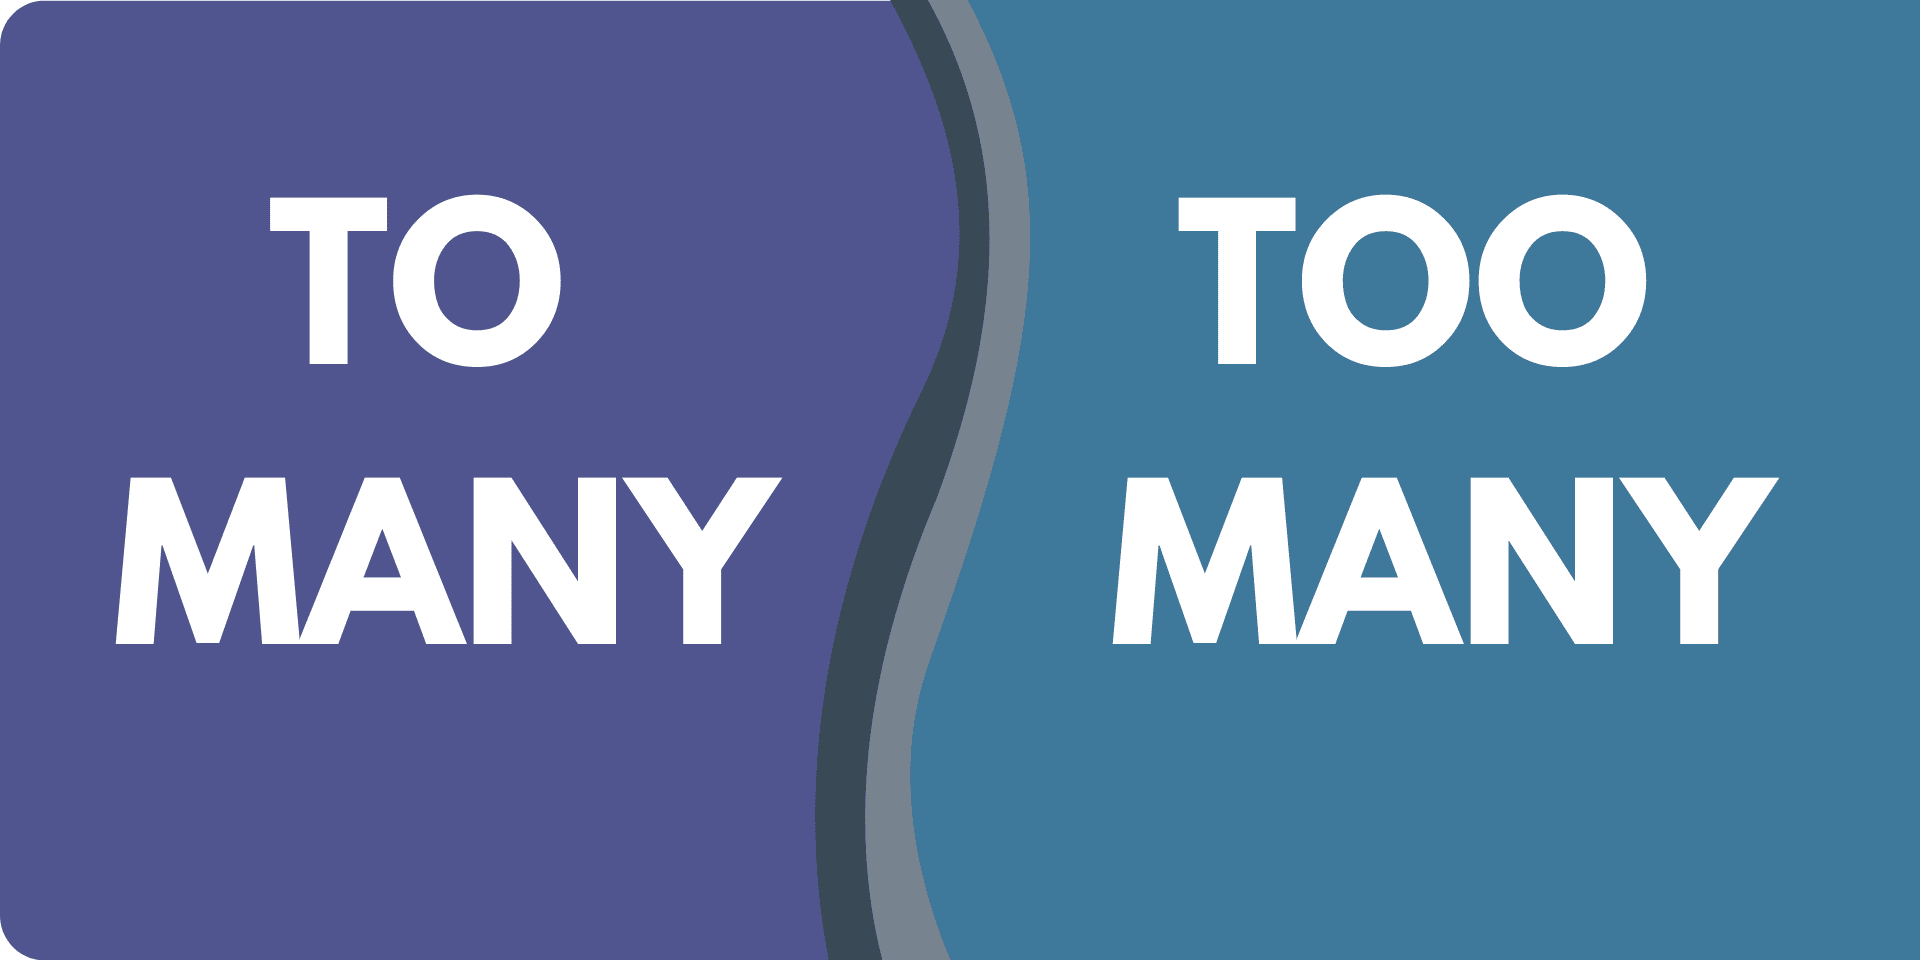 A two-toned graphic with the words "To Many" and "Too Many"